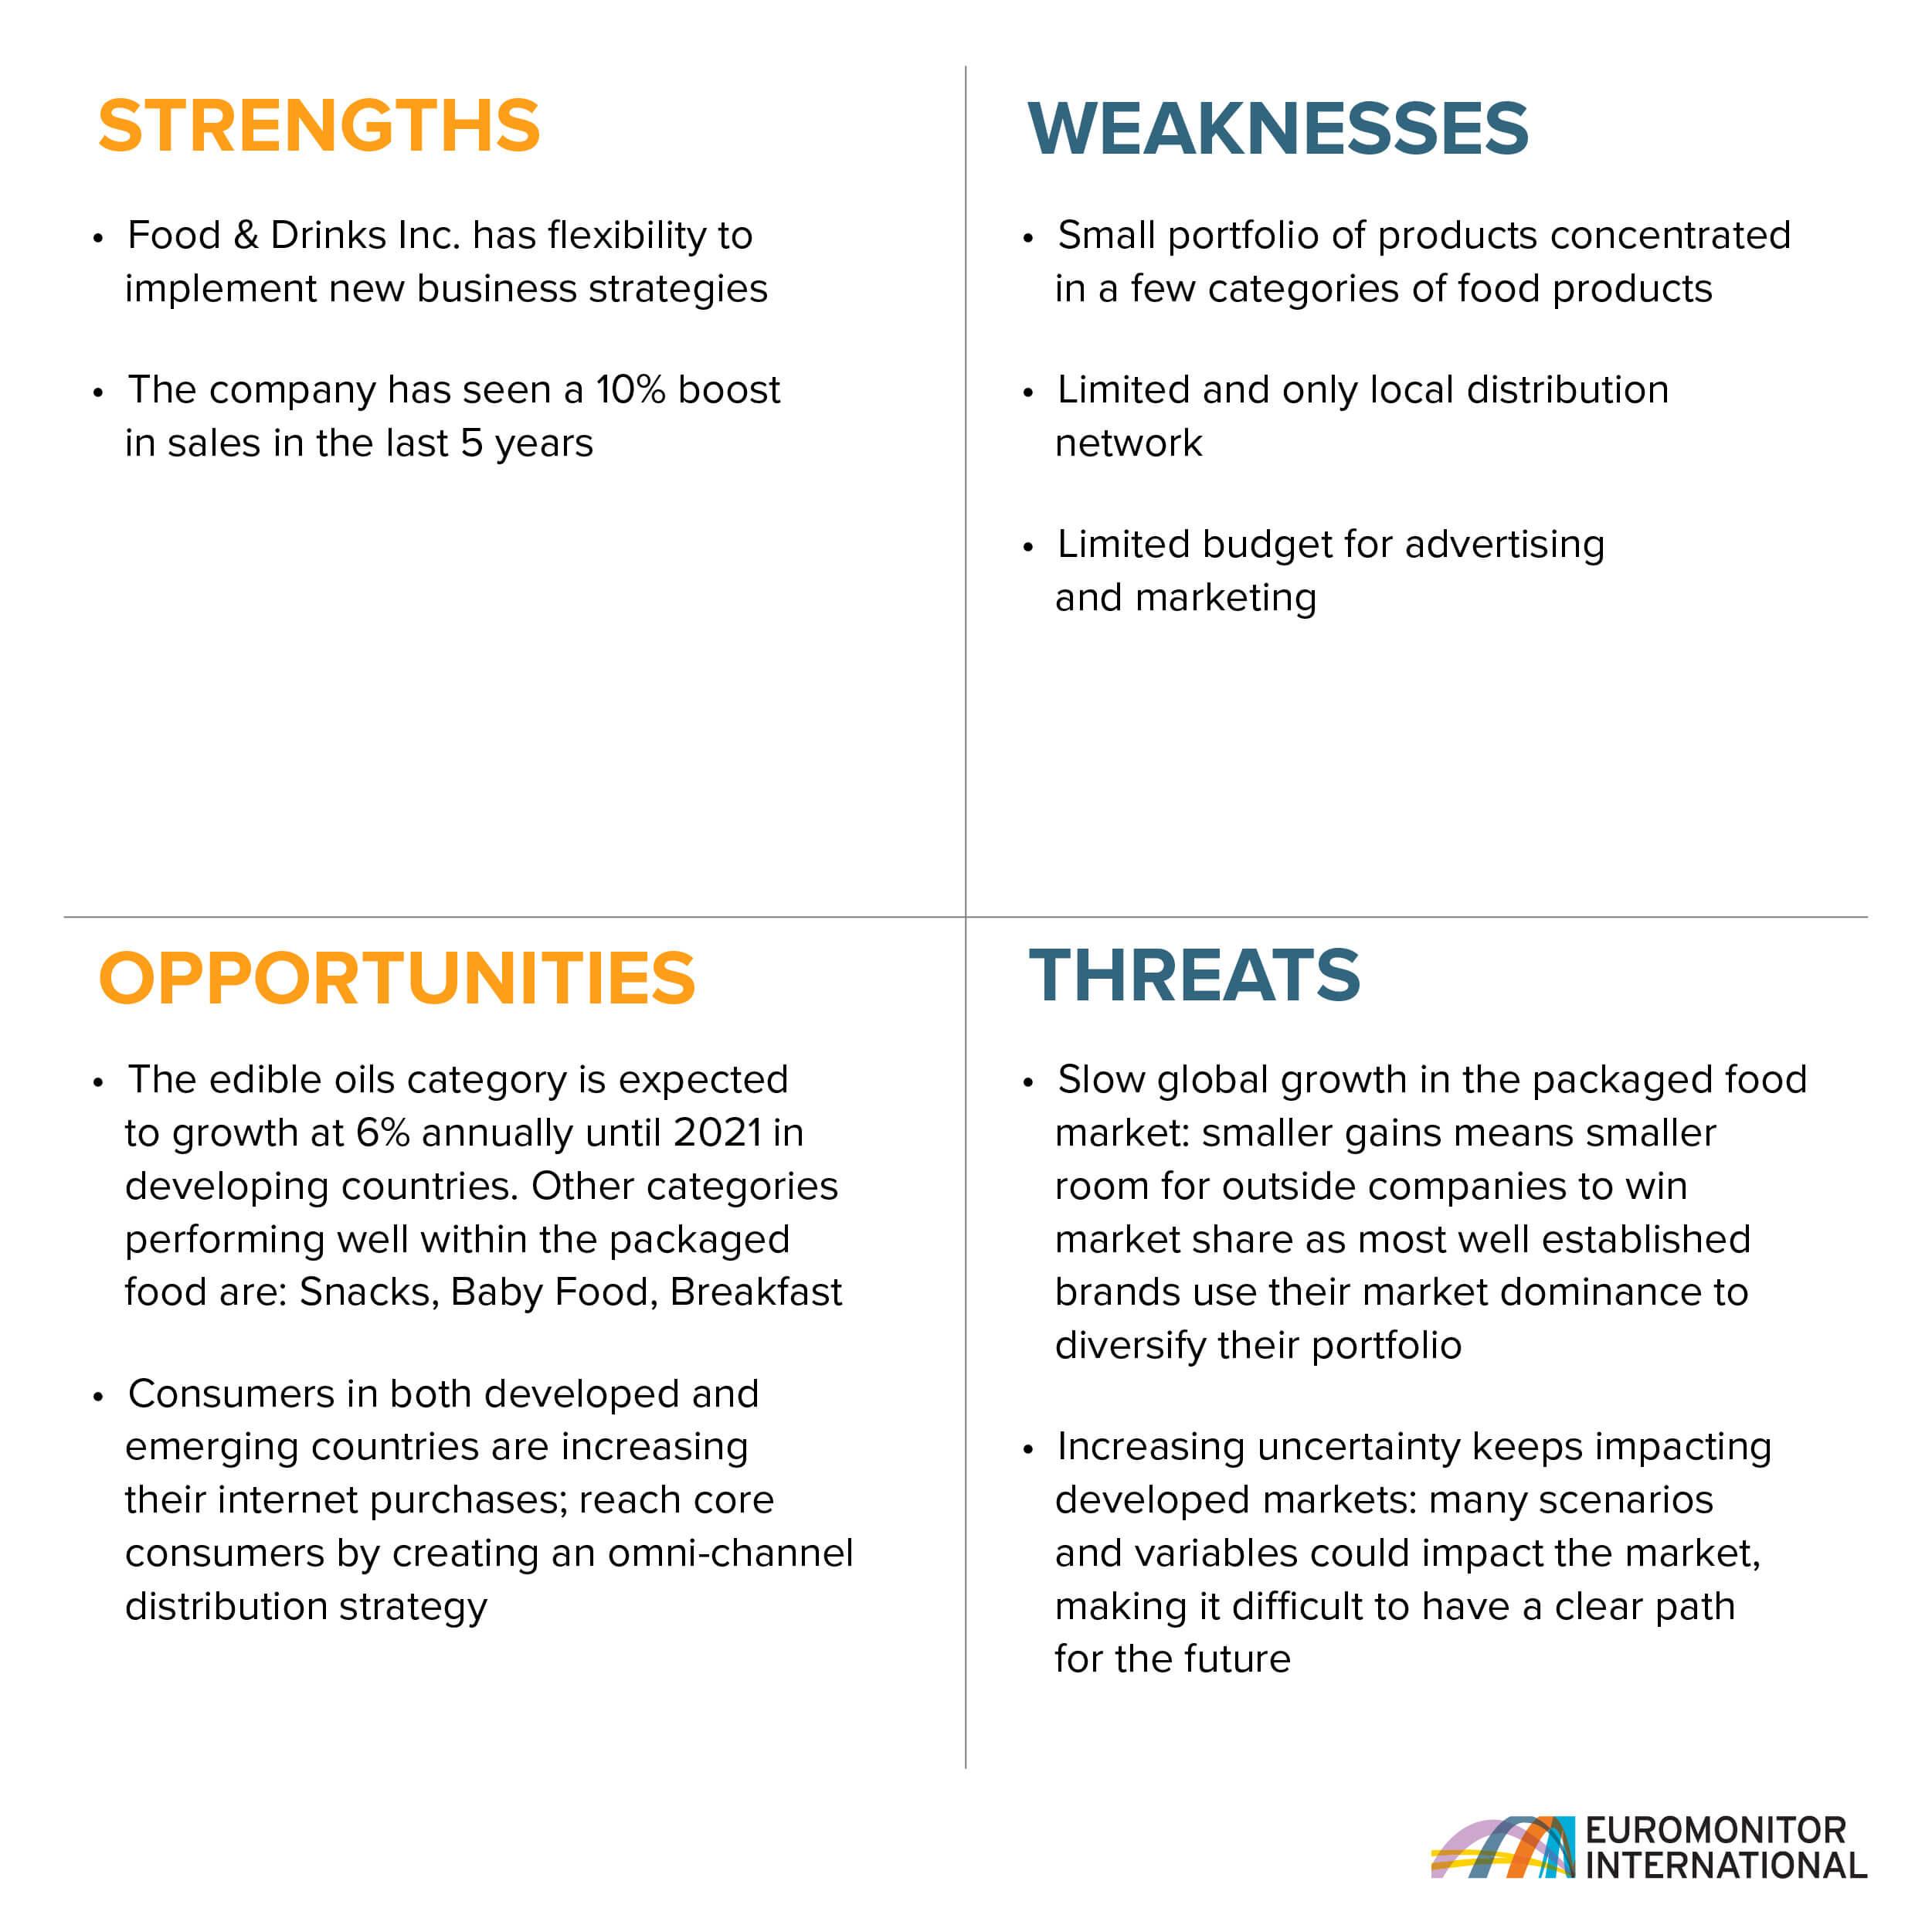 case study for swot analysis